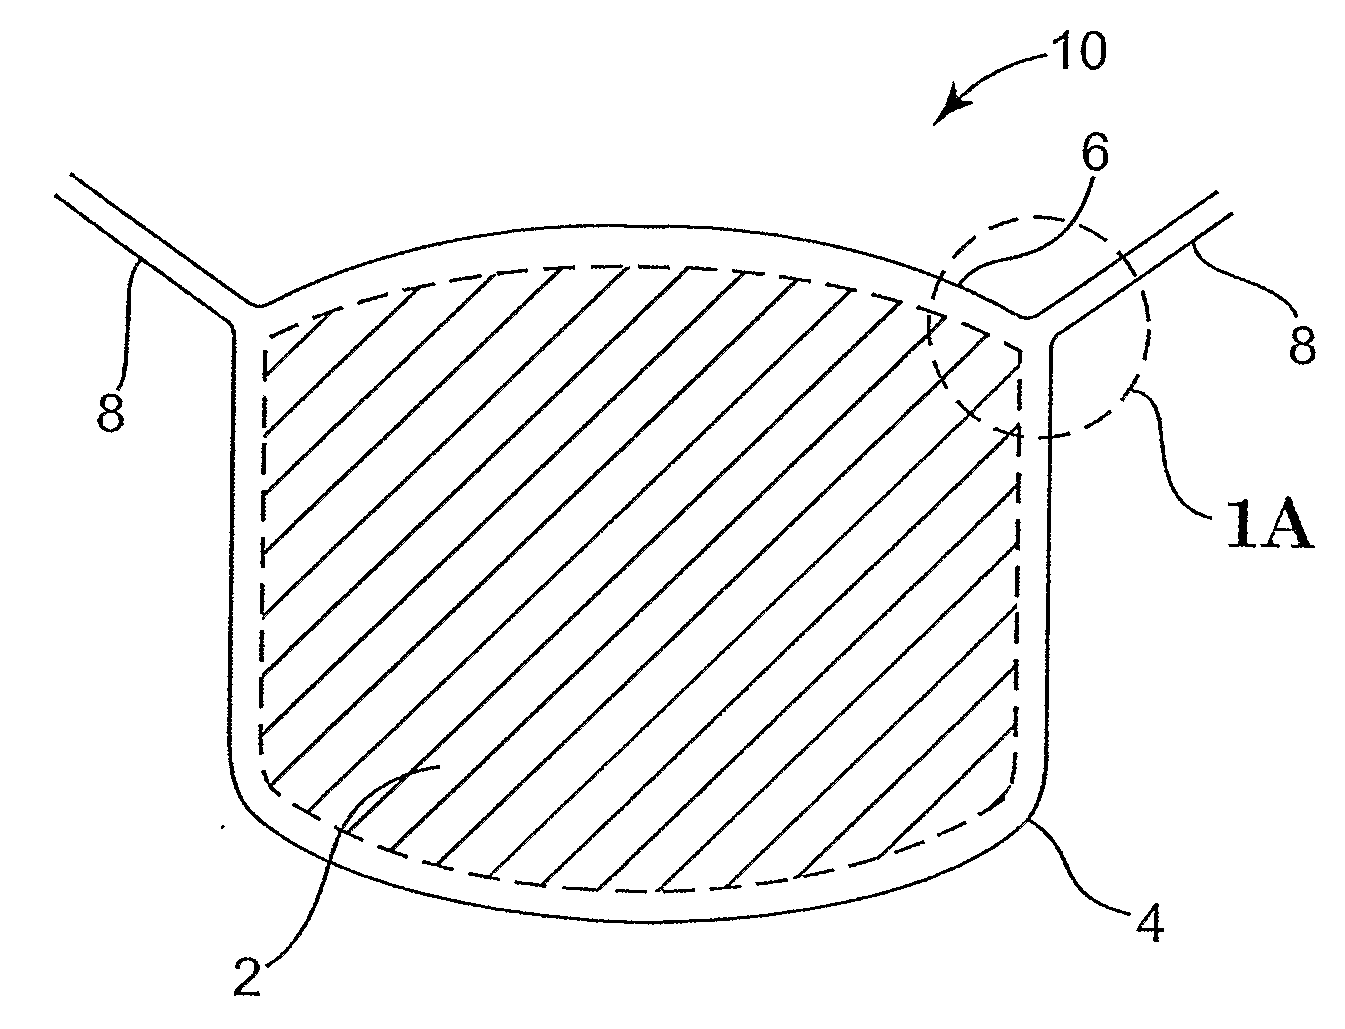 Developed Dough Product in Moderately Pressurized Package, and Related Methods